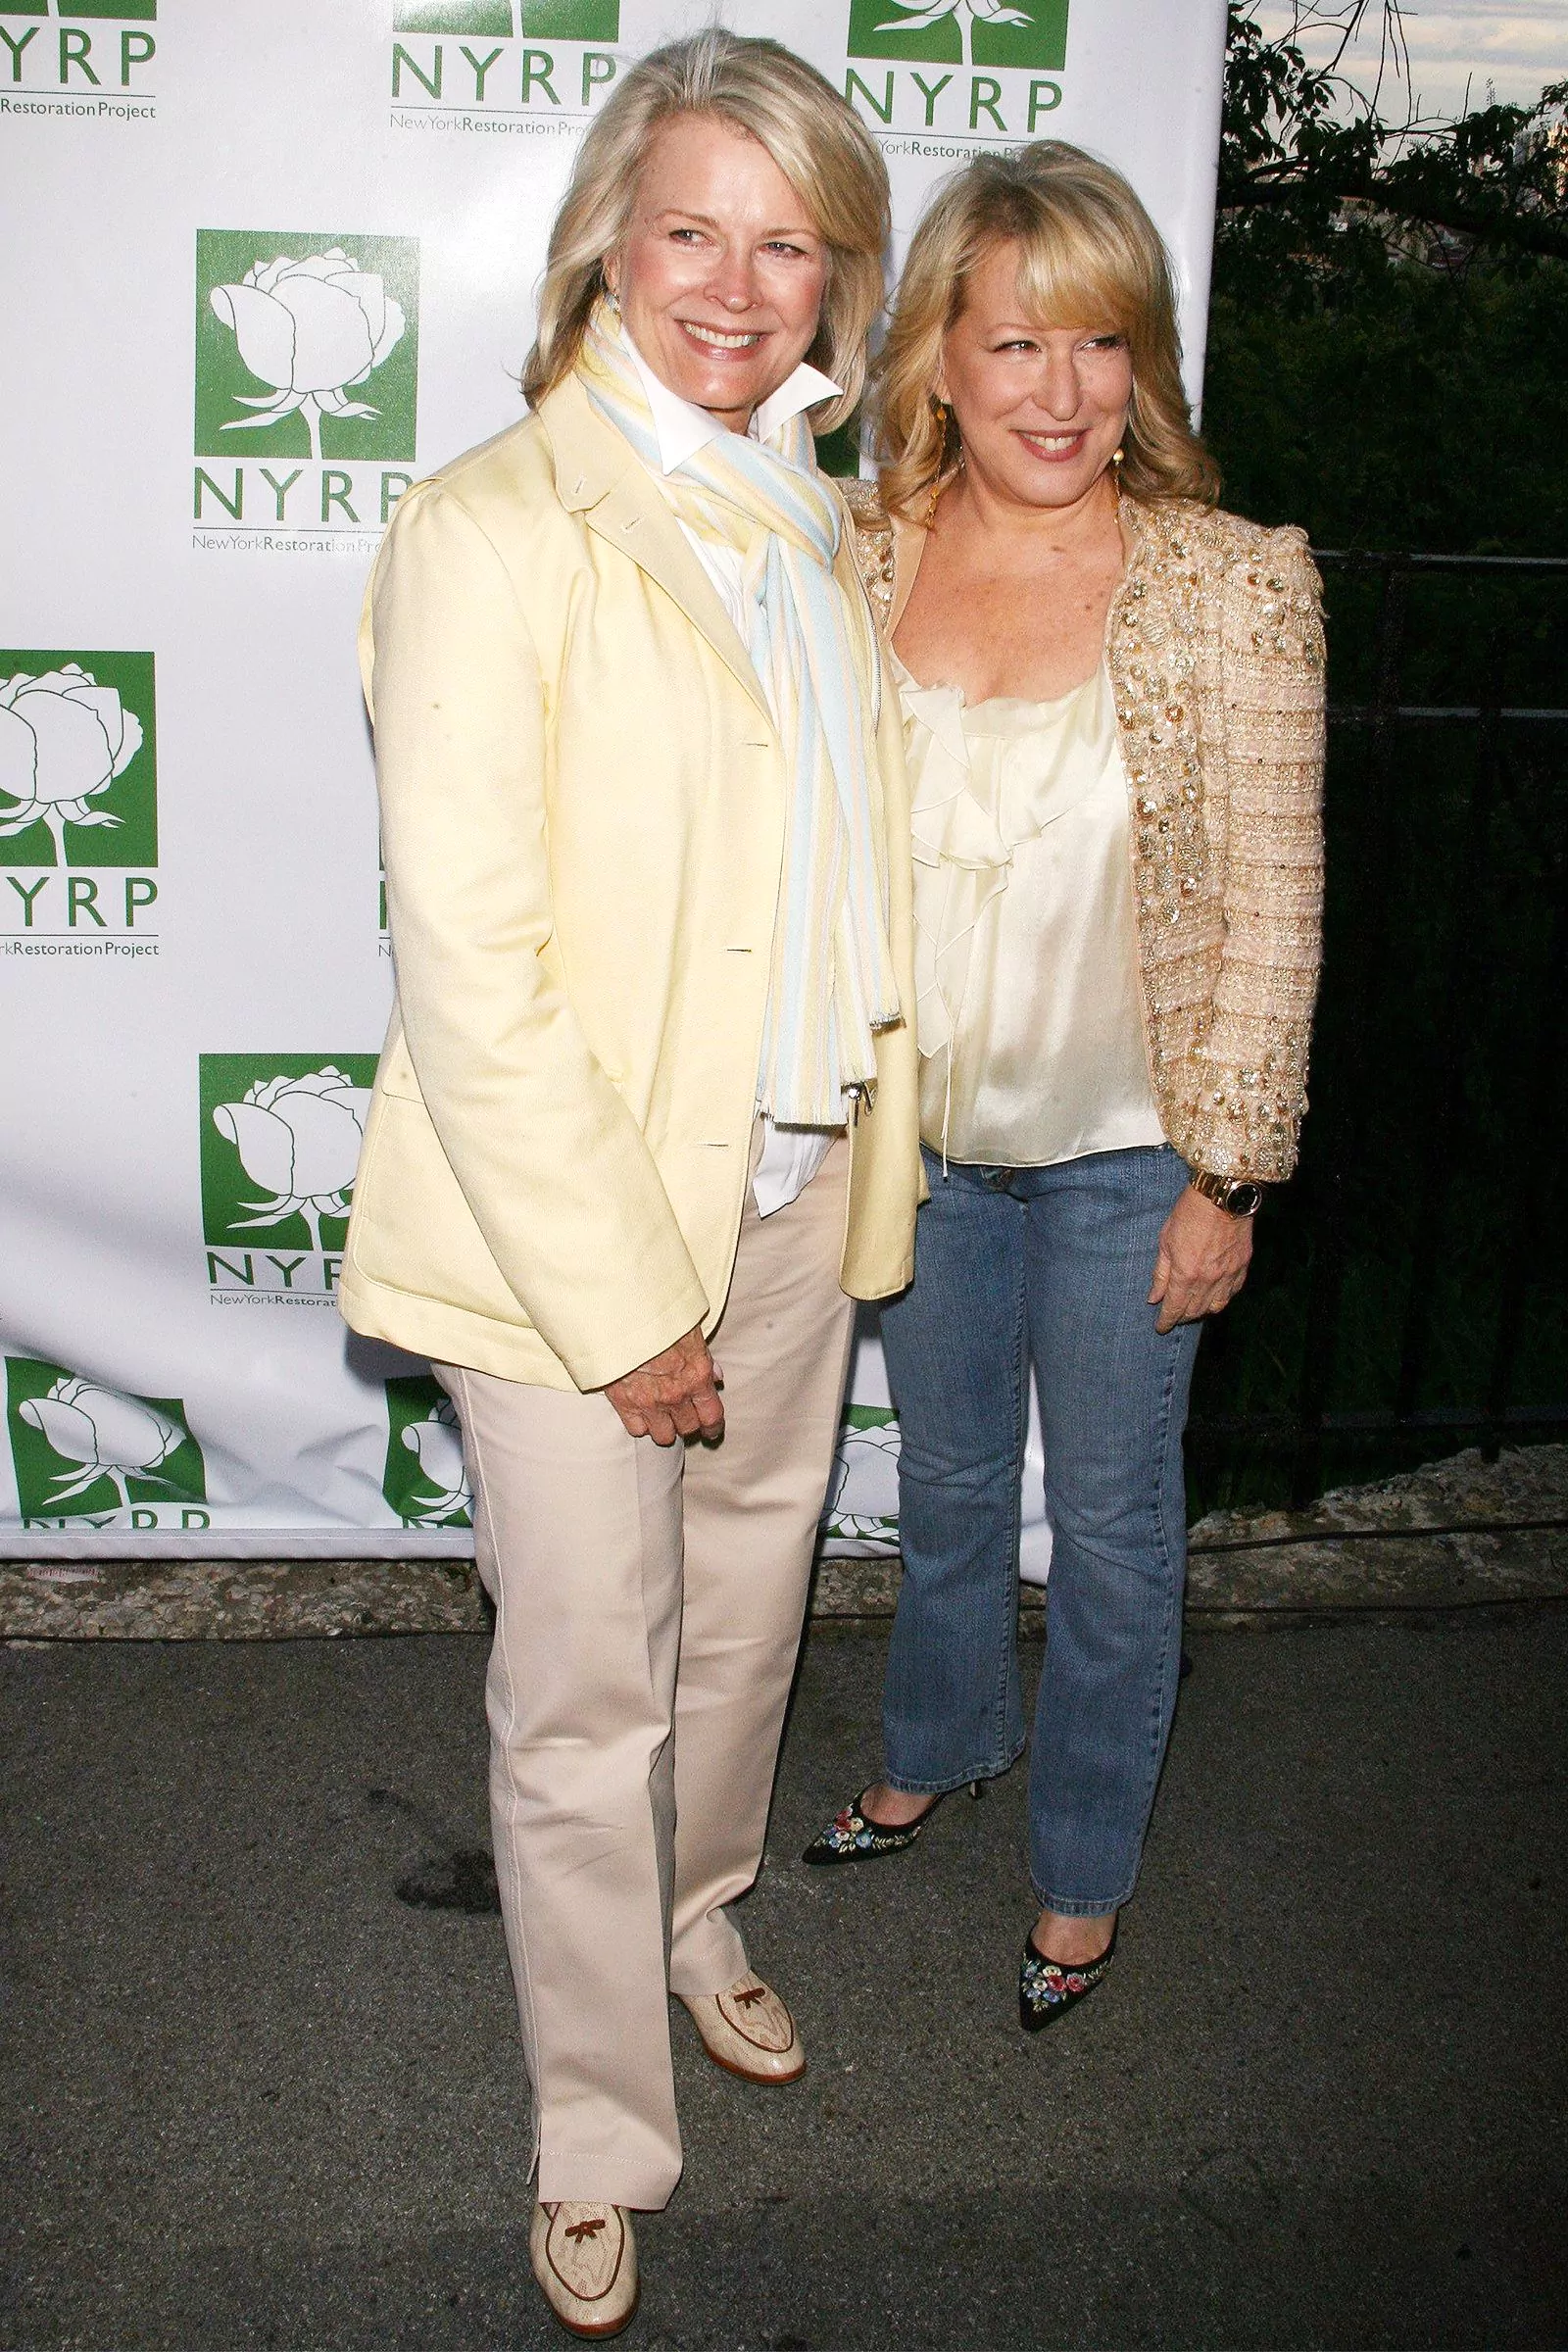 Candice Bergen and Bette Midler at the 5th Annual Highbridge Park Picnic, May 22, 2006